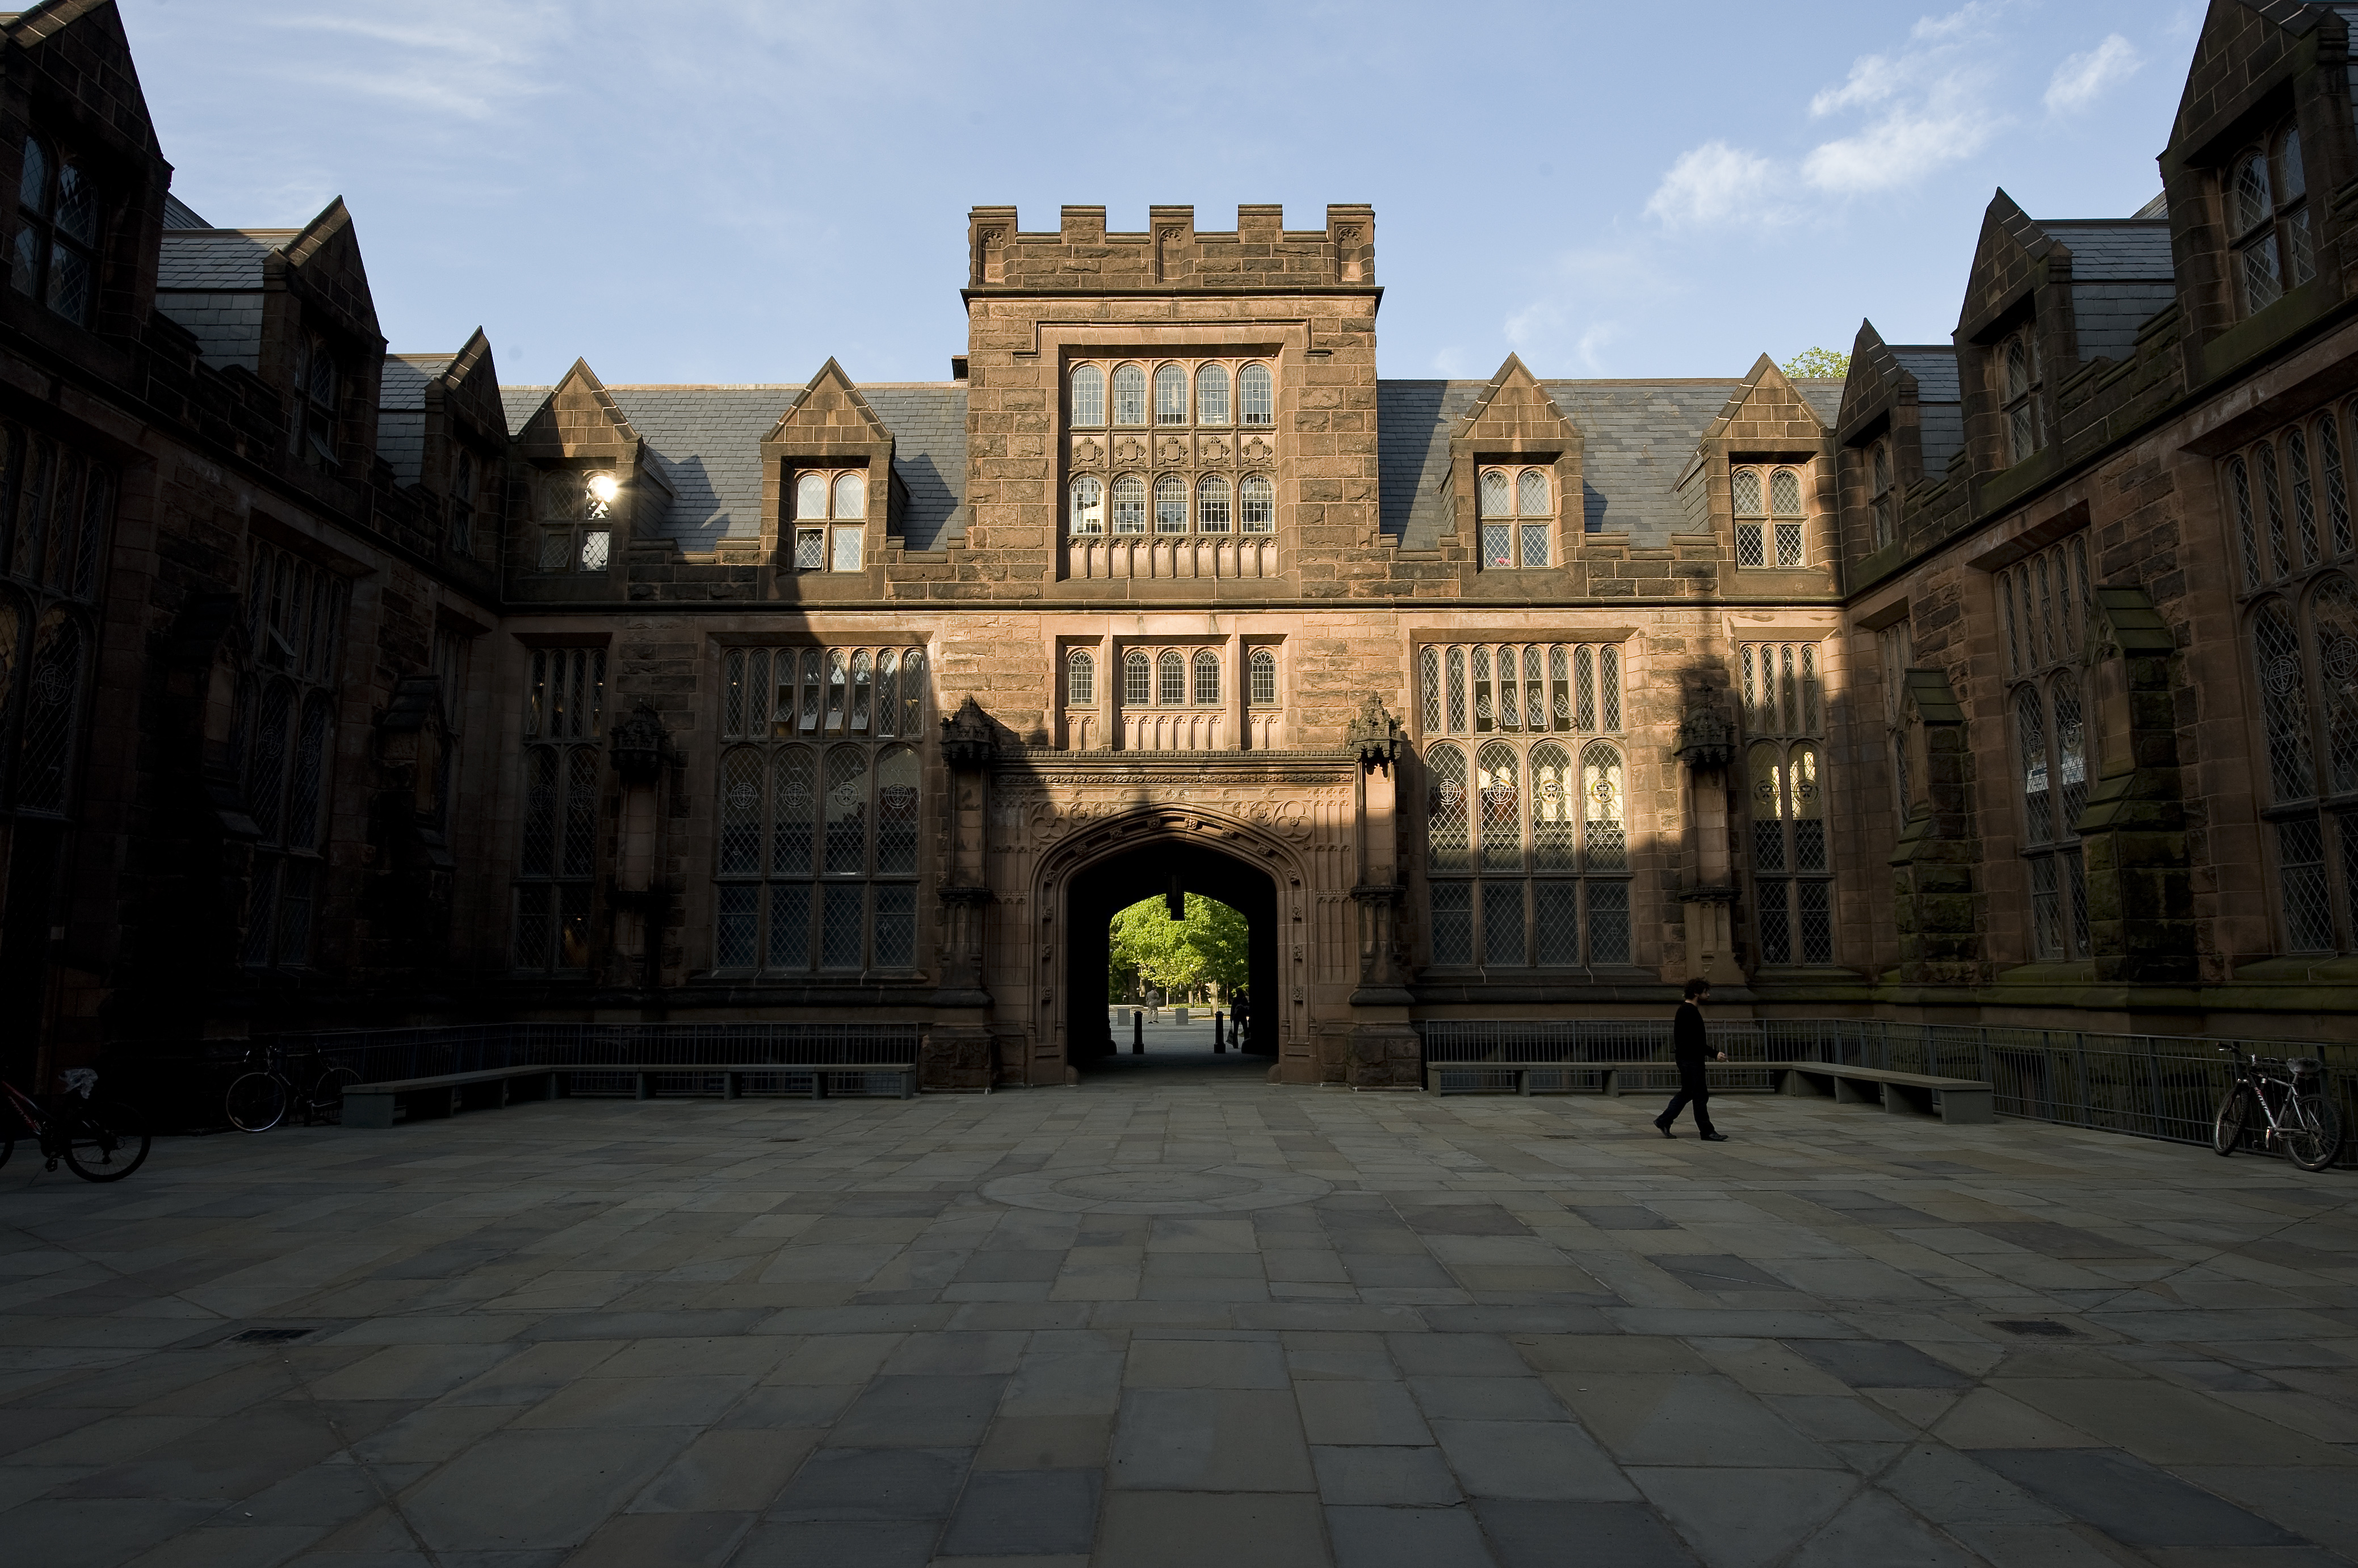 East Pyne Hall at Princeton University in Princeton, New Jersey. | Source: Getty Images